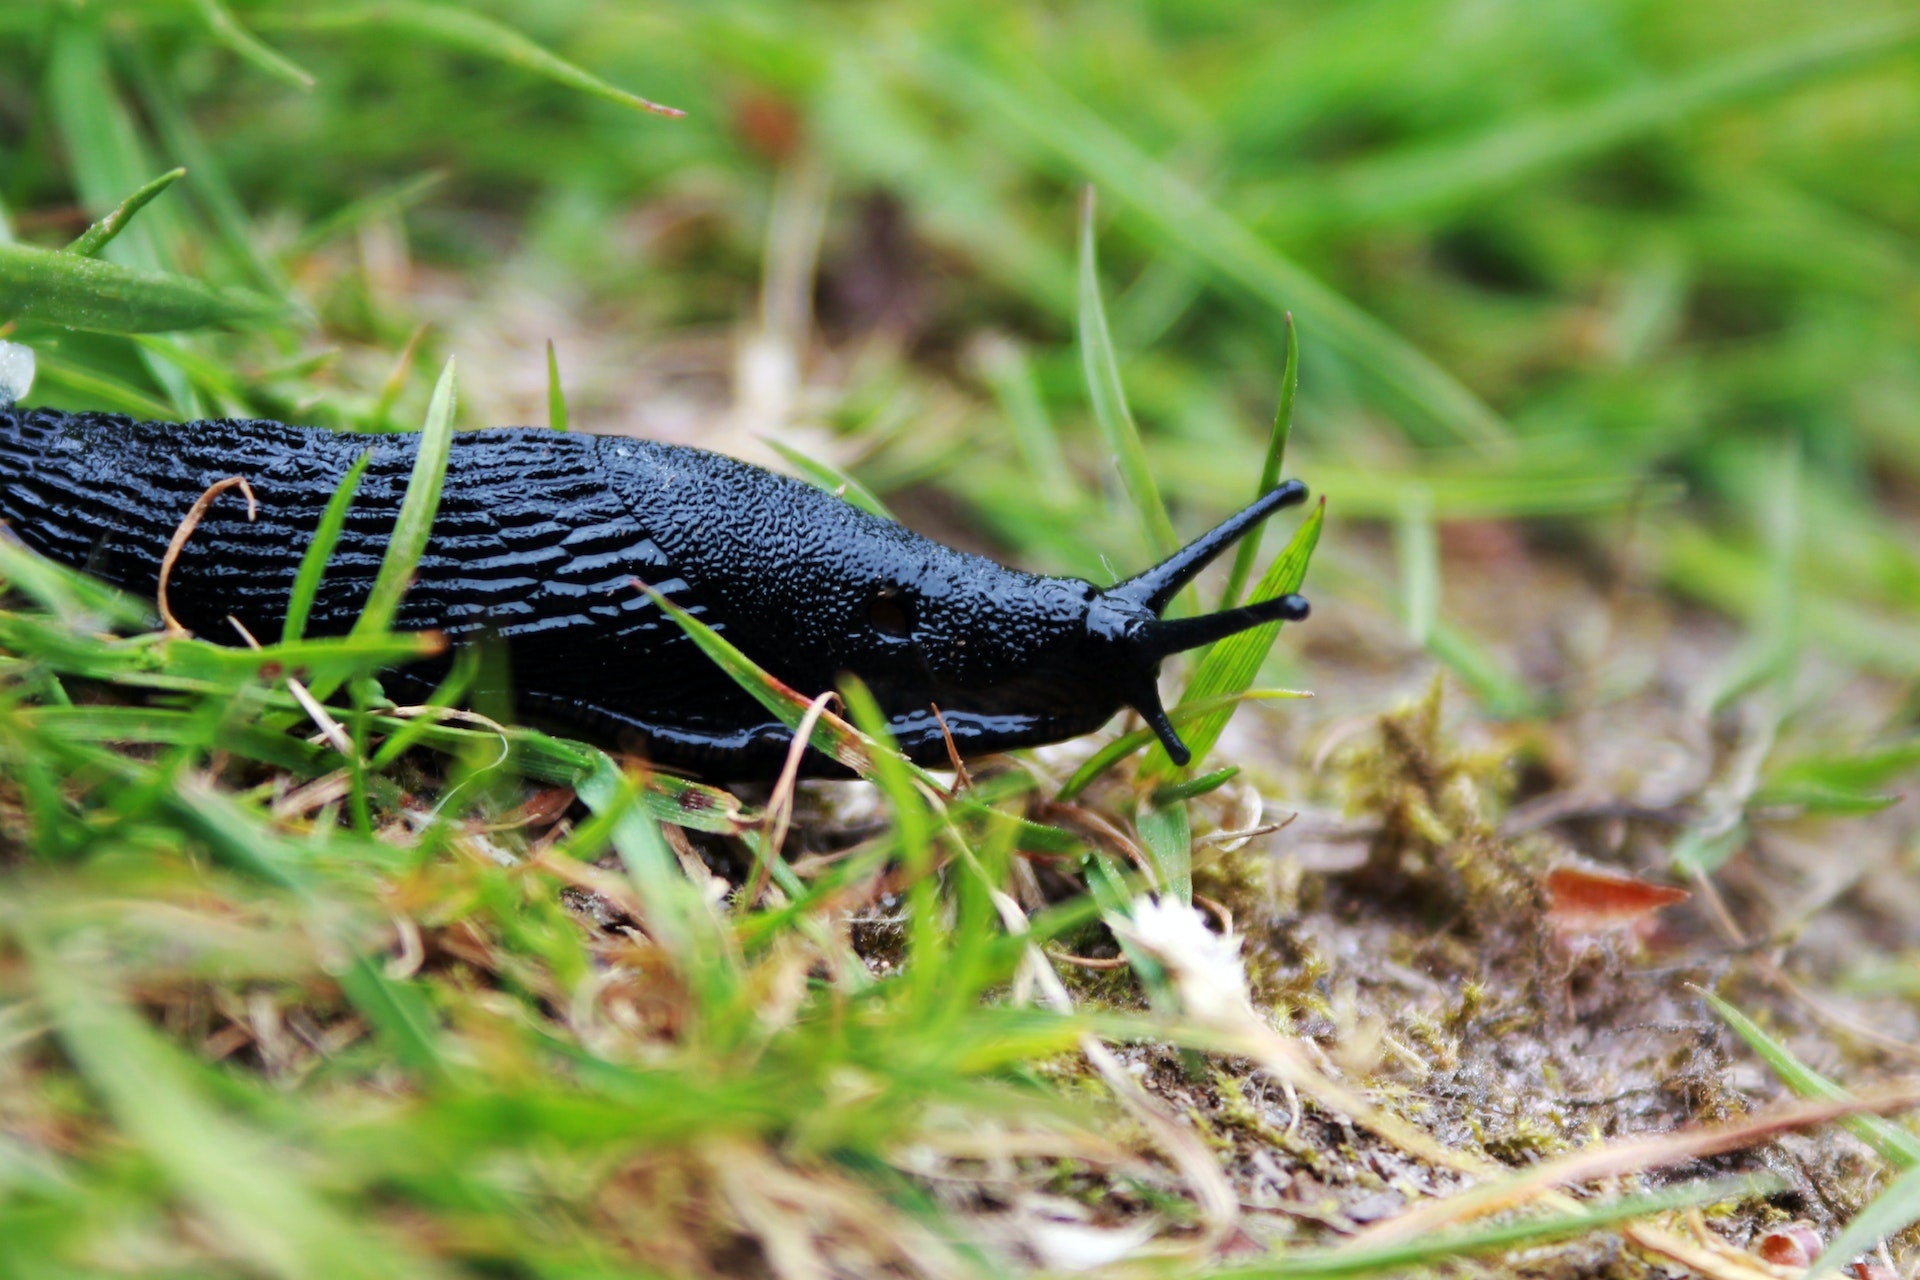 Most common garden pests